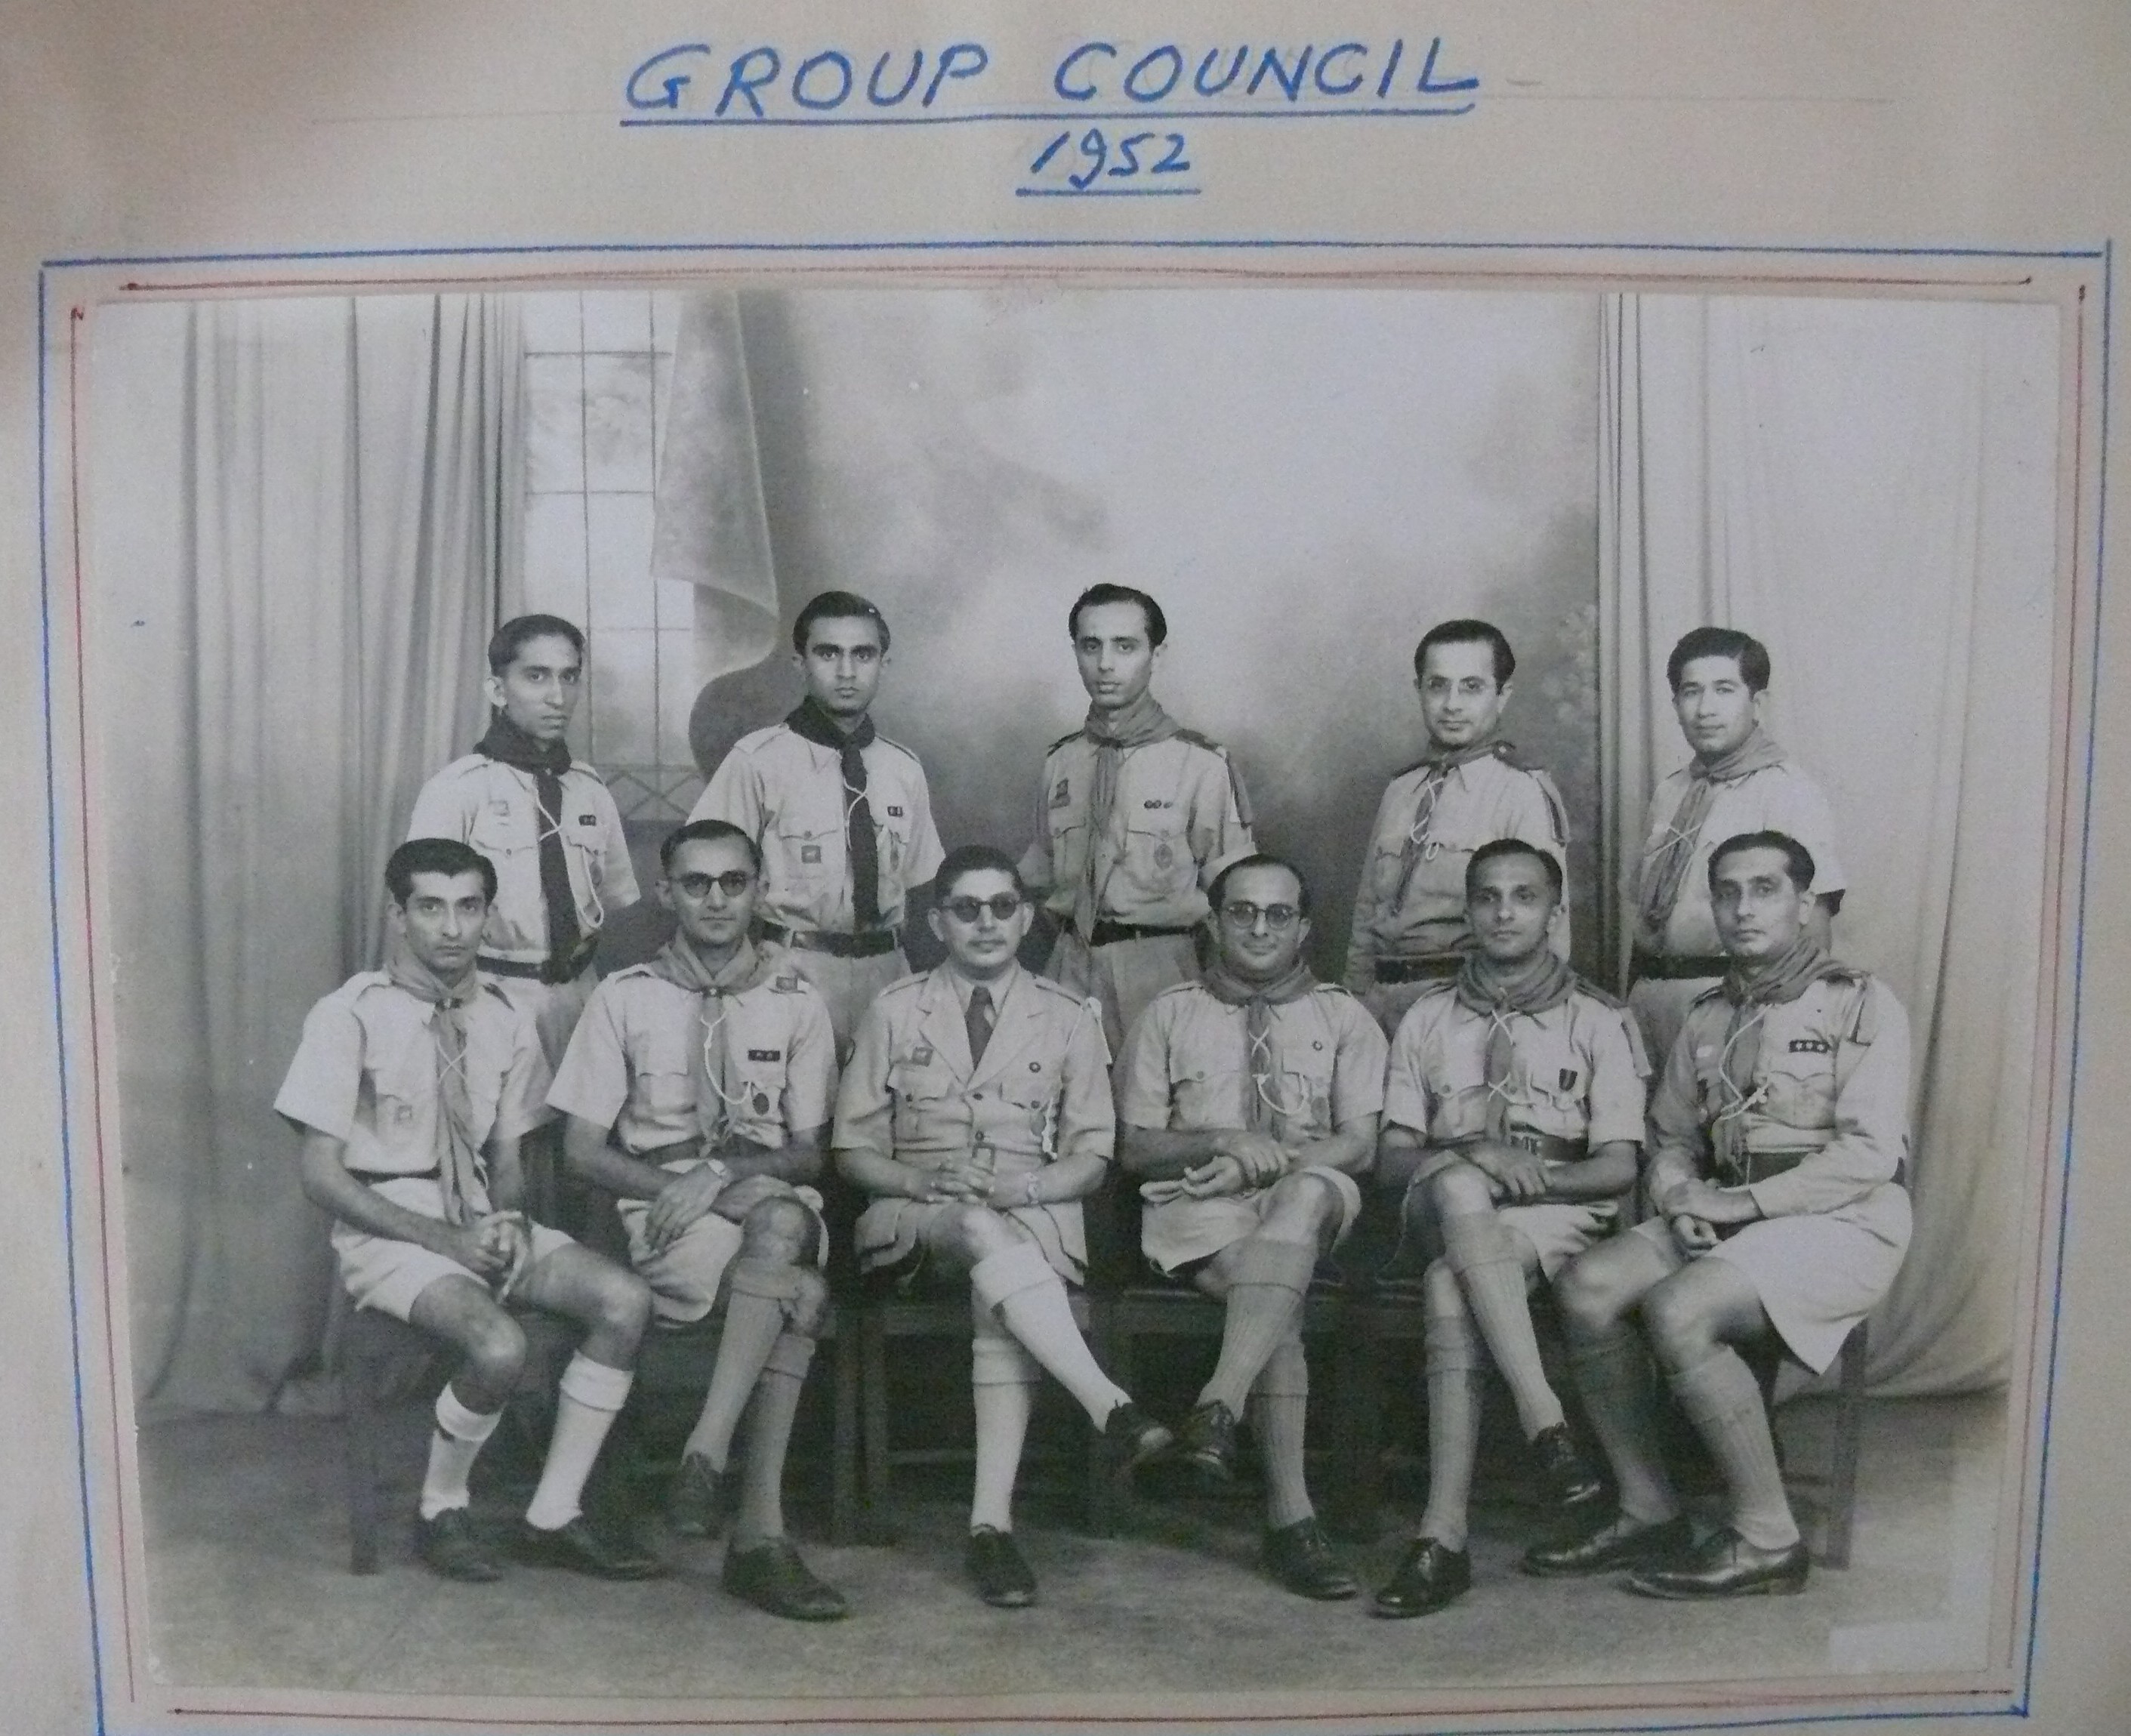 1929-1979-scouts-in-mombasa-1952-group-council-90405